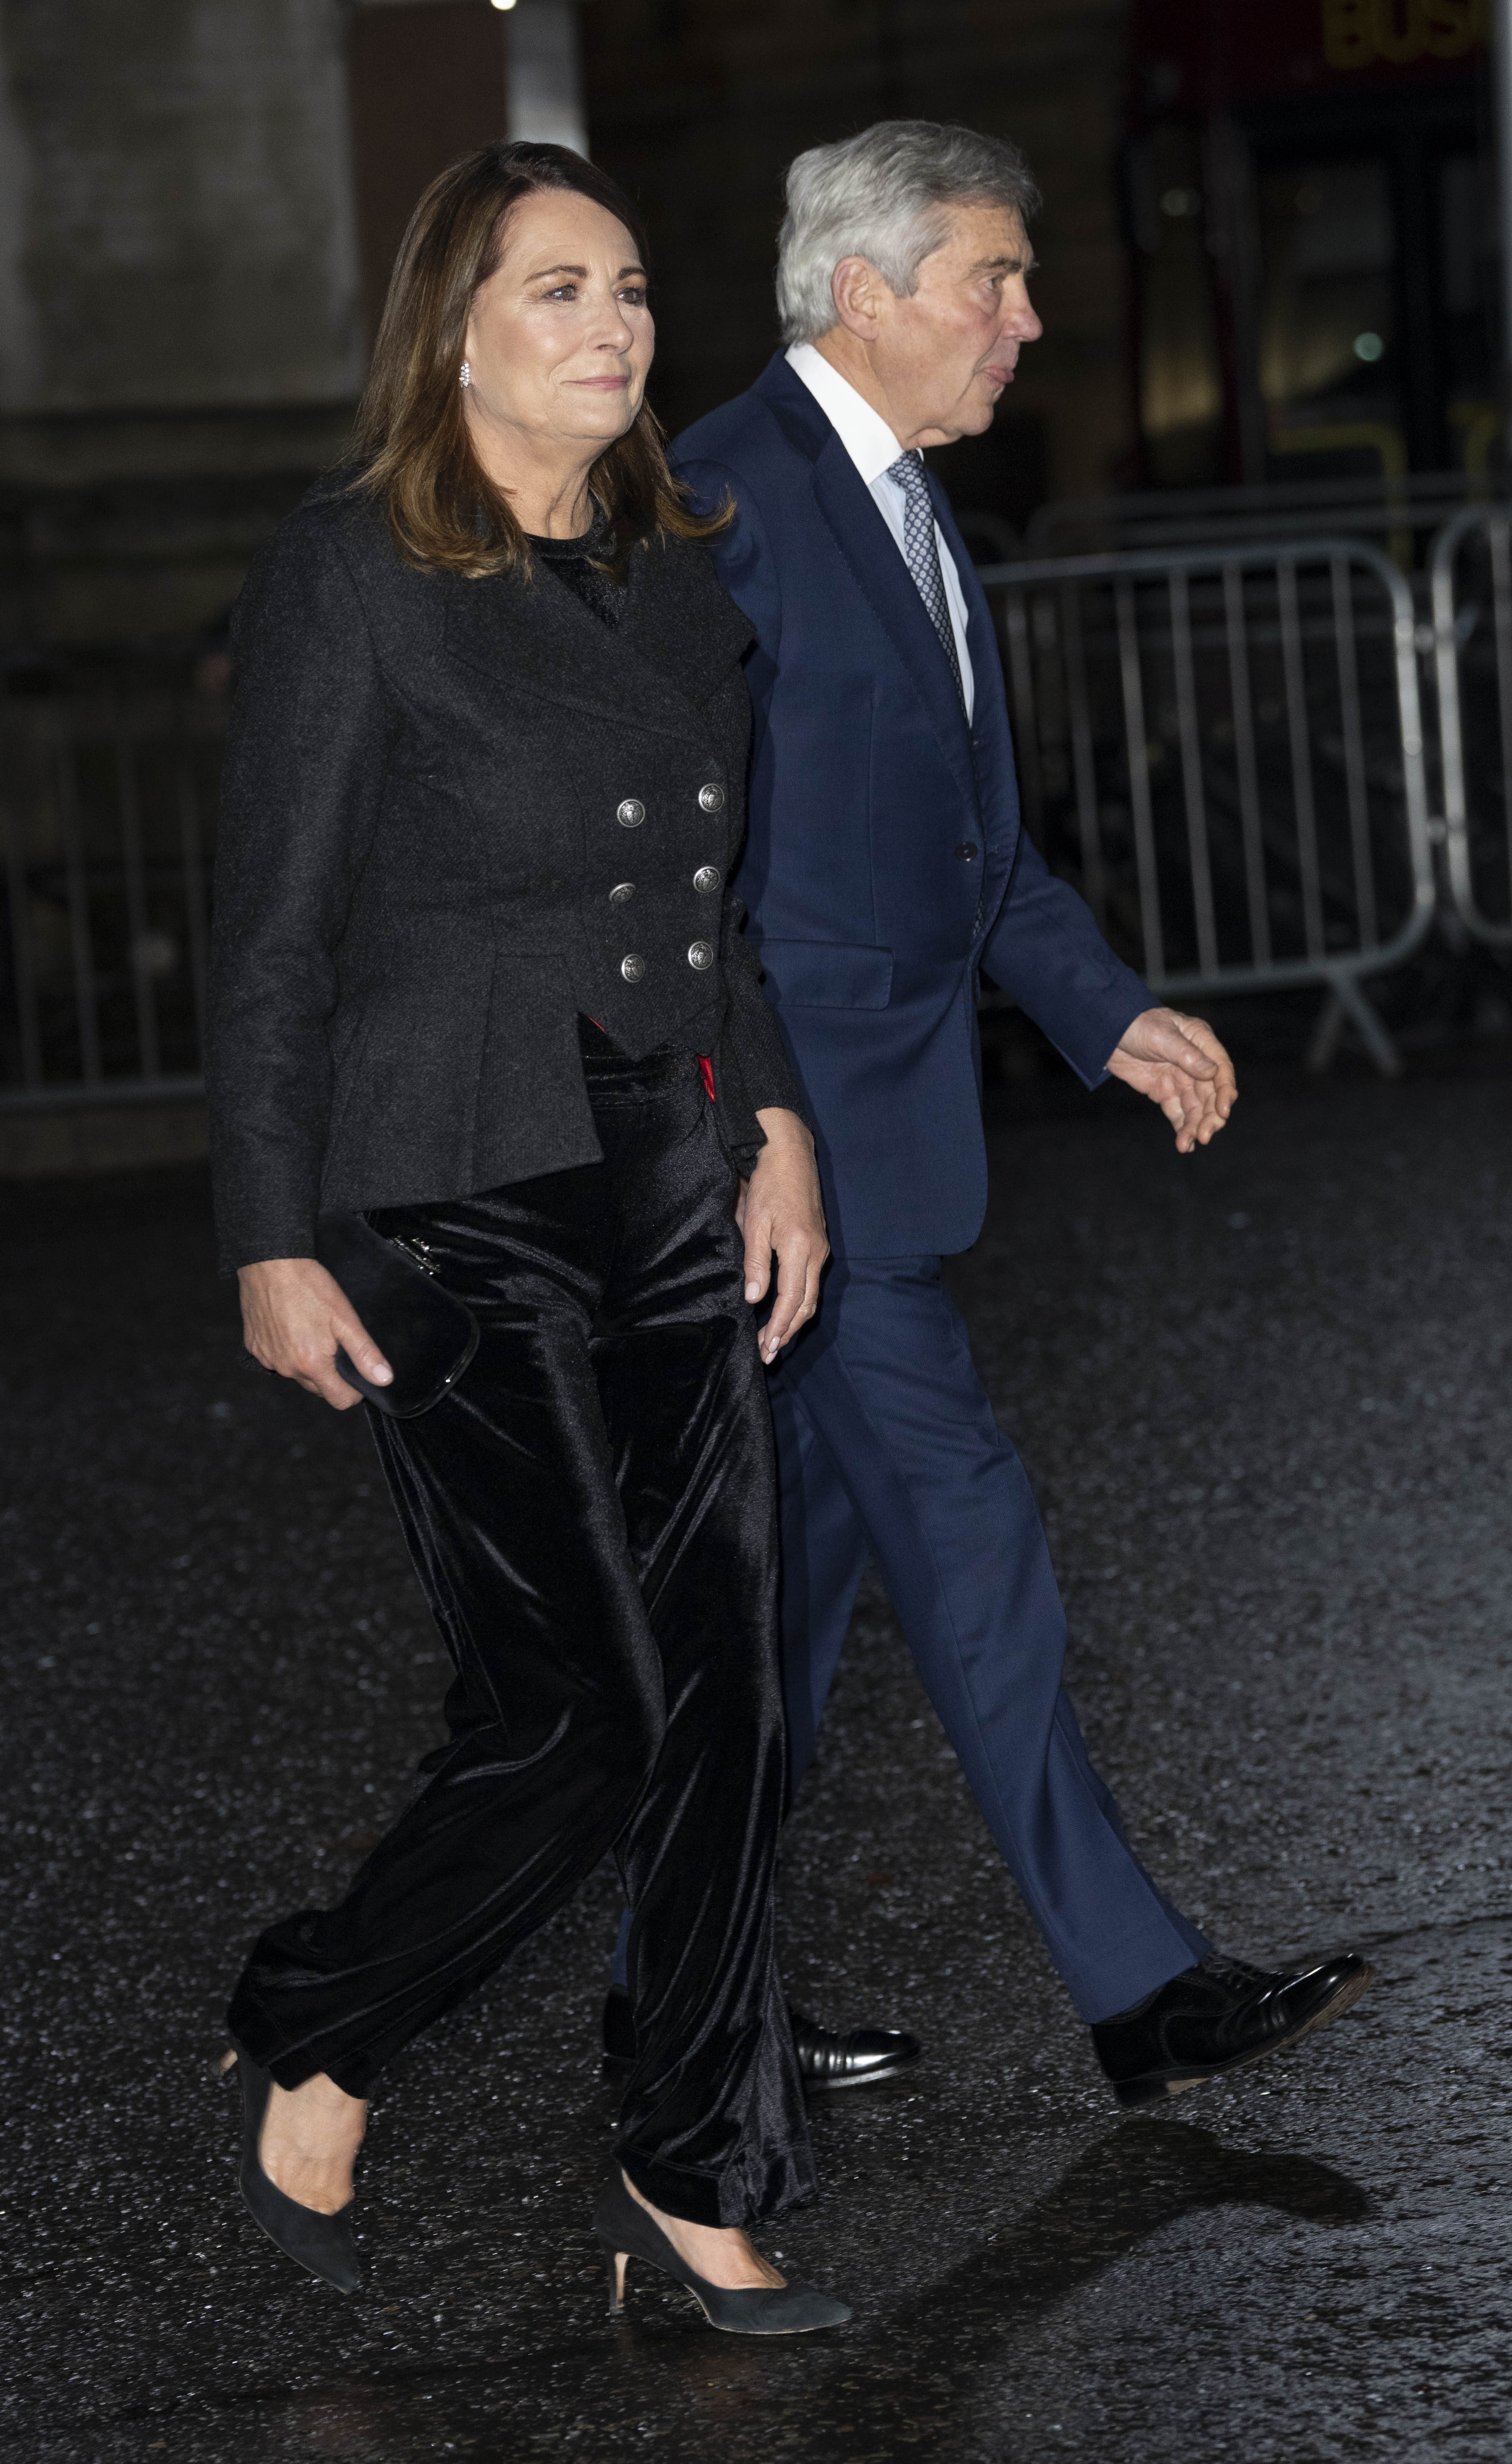 Carole and Michael Middleton attending the "Together At Christmas" Carol Service in London, England on December 8, 2023 | Source: Getty Images